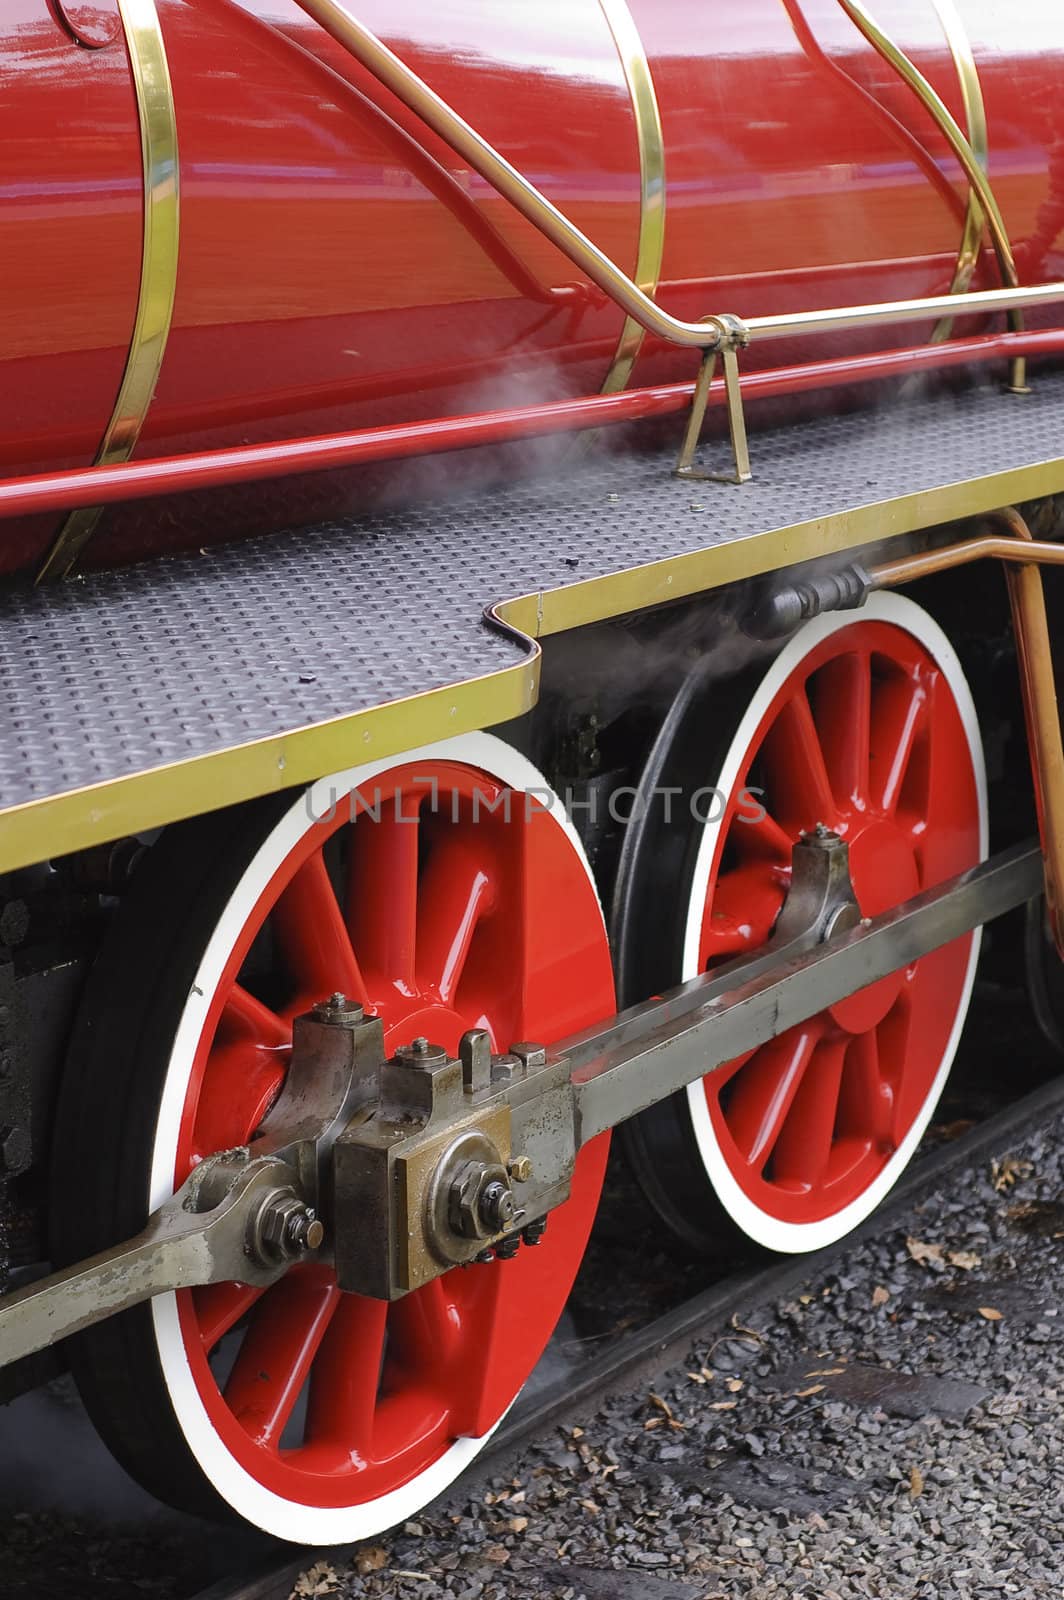 Vertical image of two red steam locomotive wheels